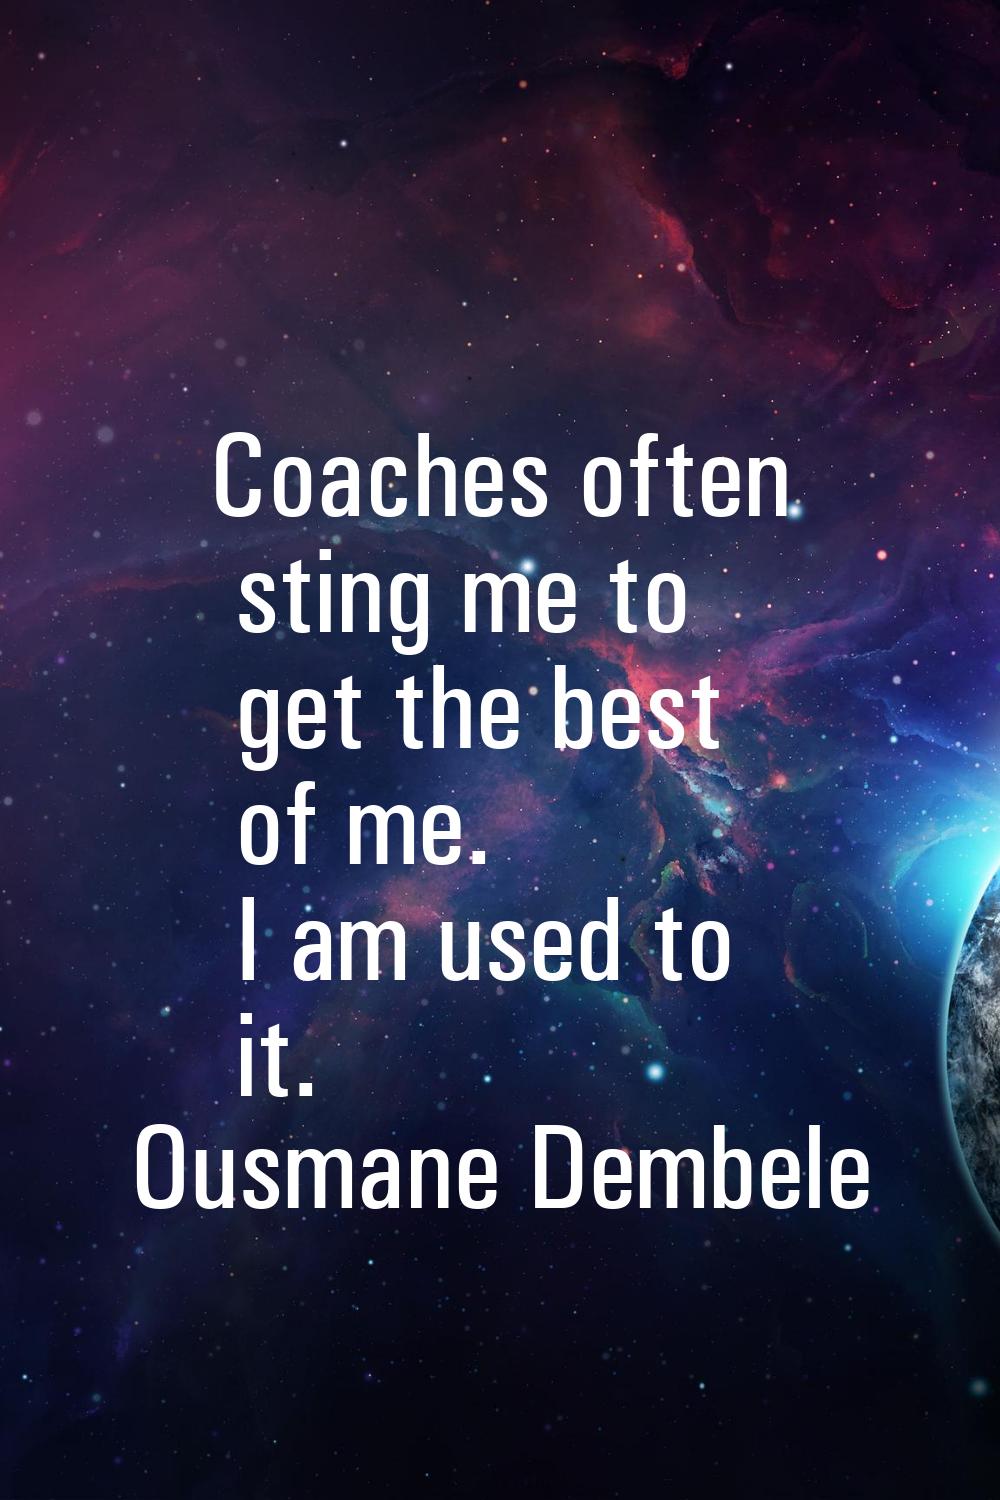 Coaches often sting me to get the best of me. I am used to it.